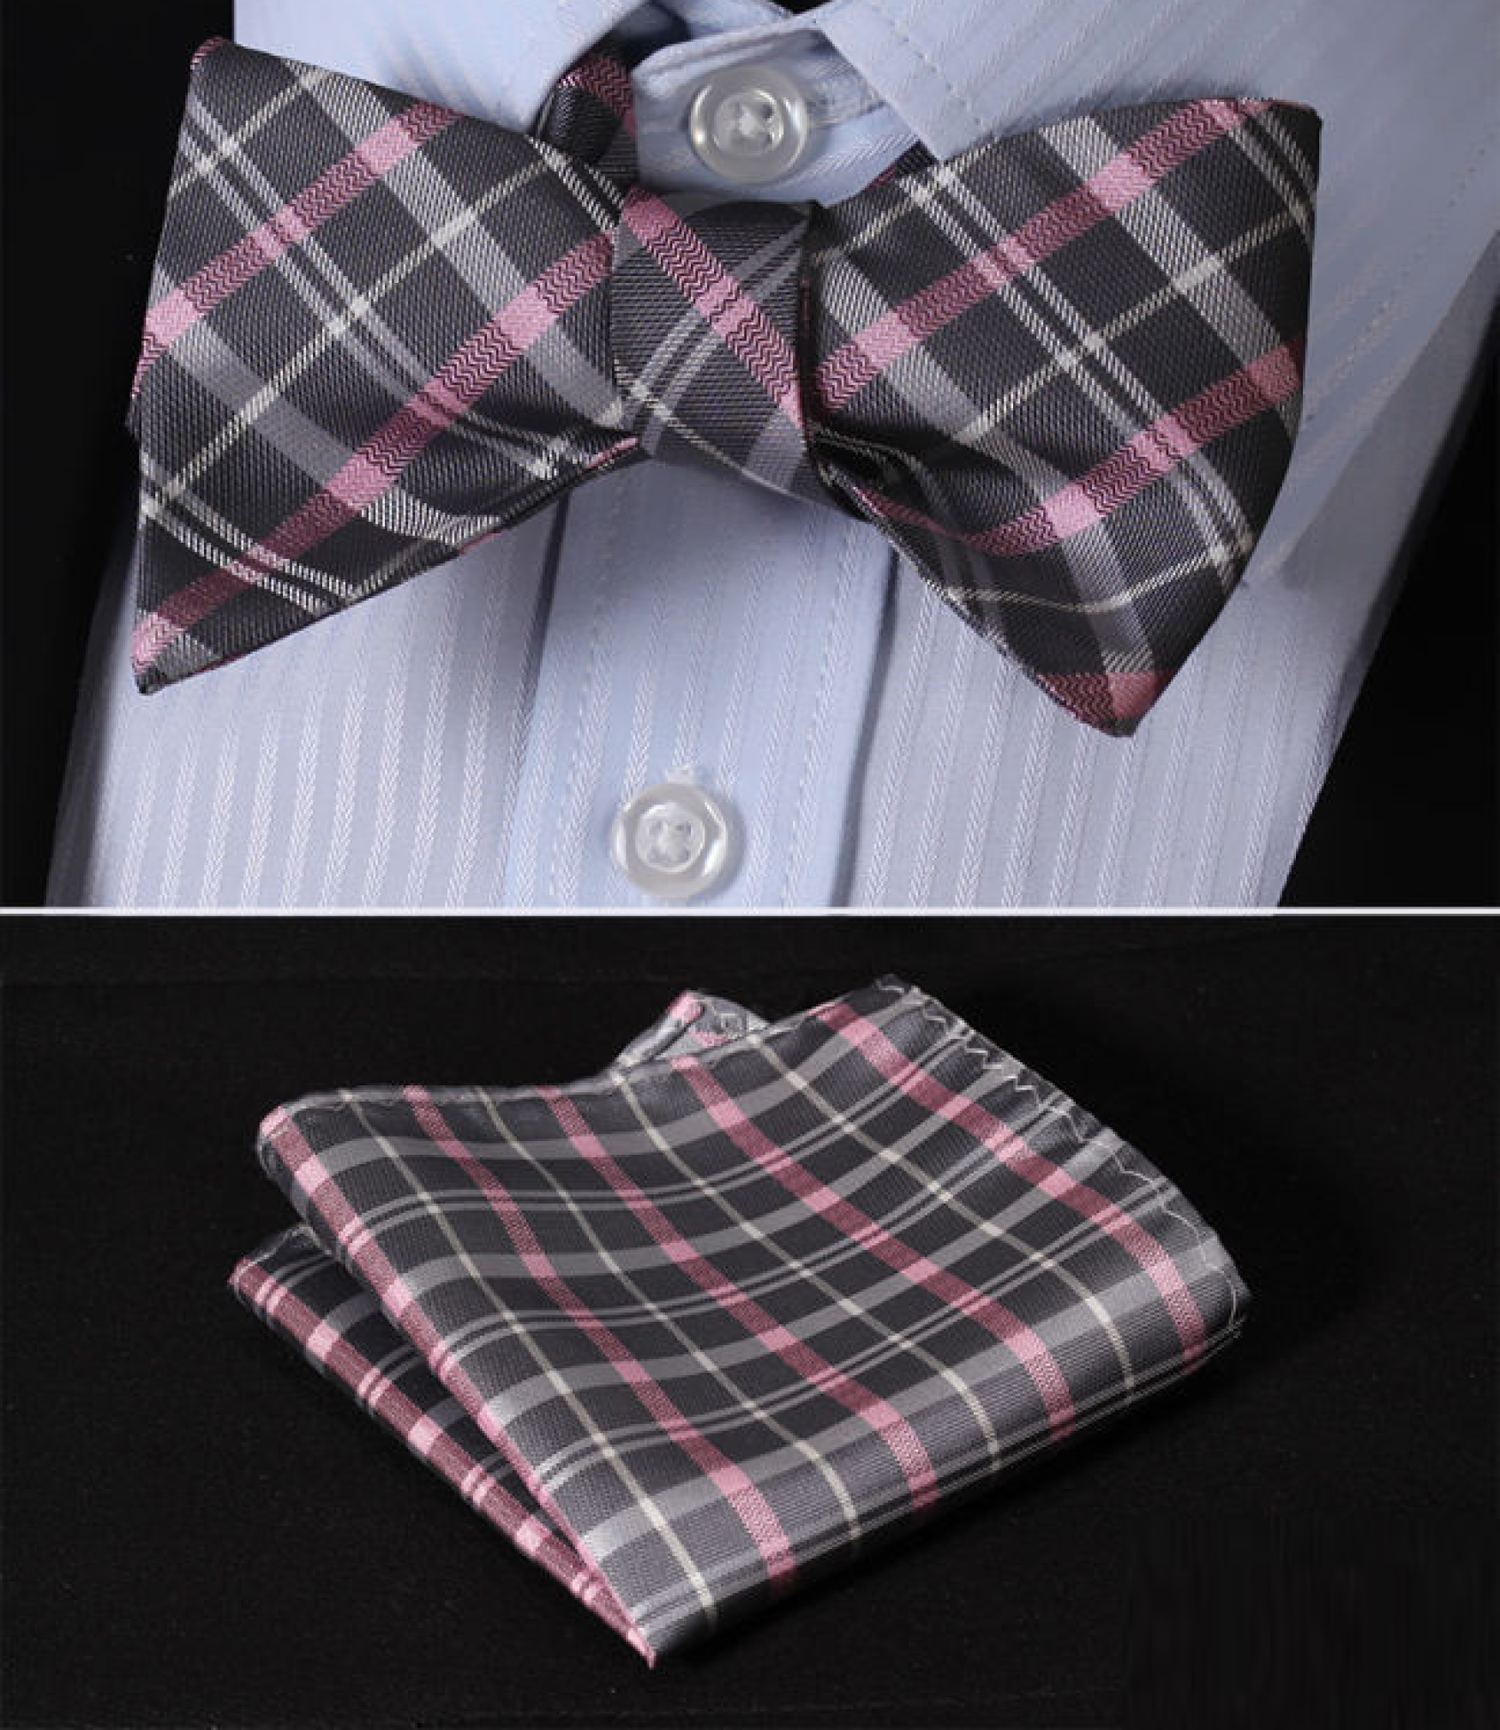 Main View: Grey, Pink Plaid Bow Tie and Pocket Square||Grey, Pink